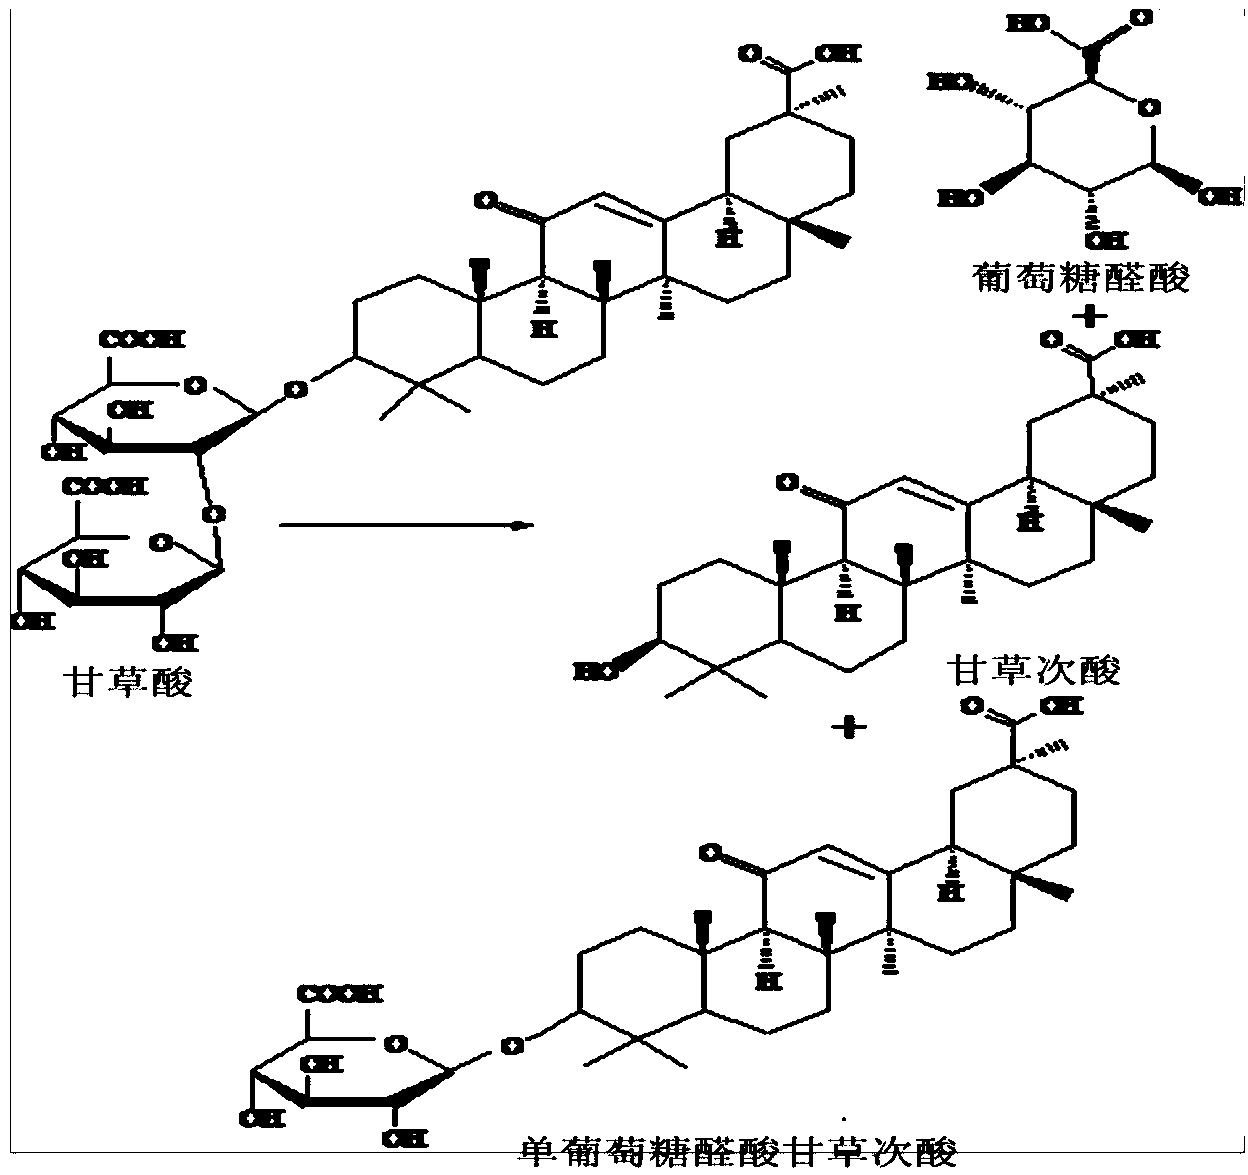 Method for preparing glycyrrhizic acid derivatives by carrying out subcritical hydrolysis reaction